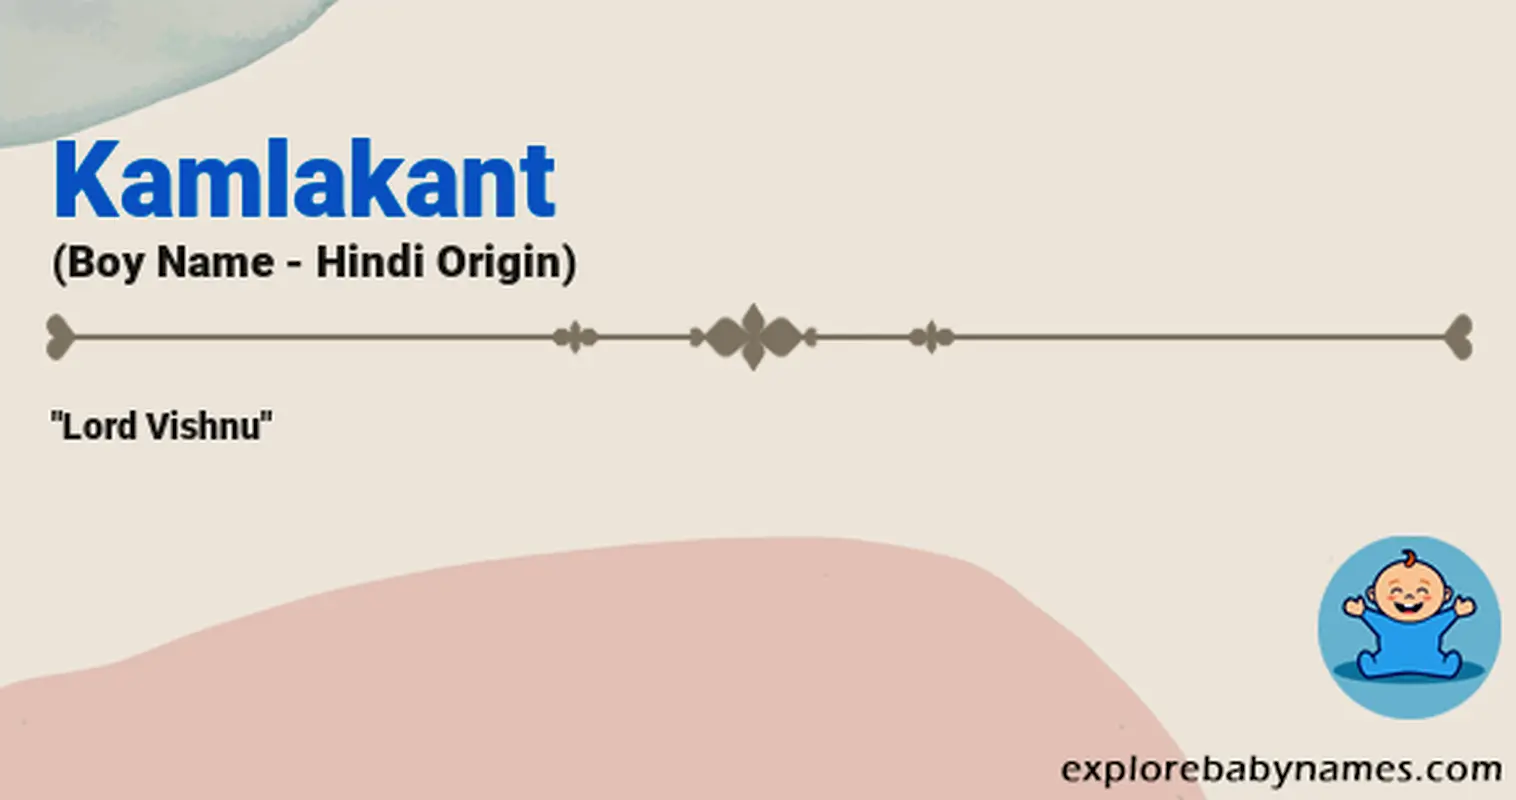 Meaning of Kamlakant